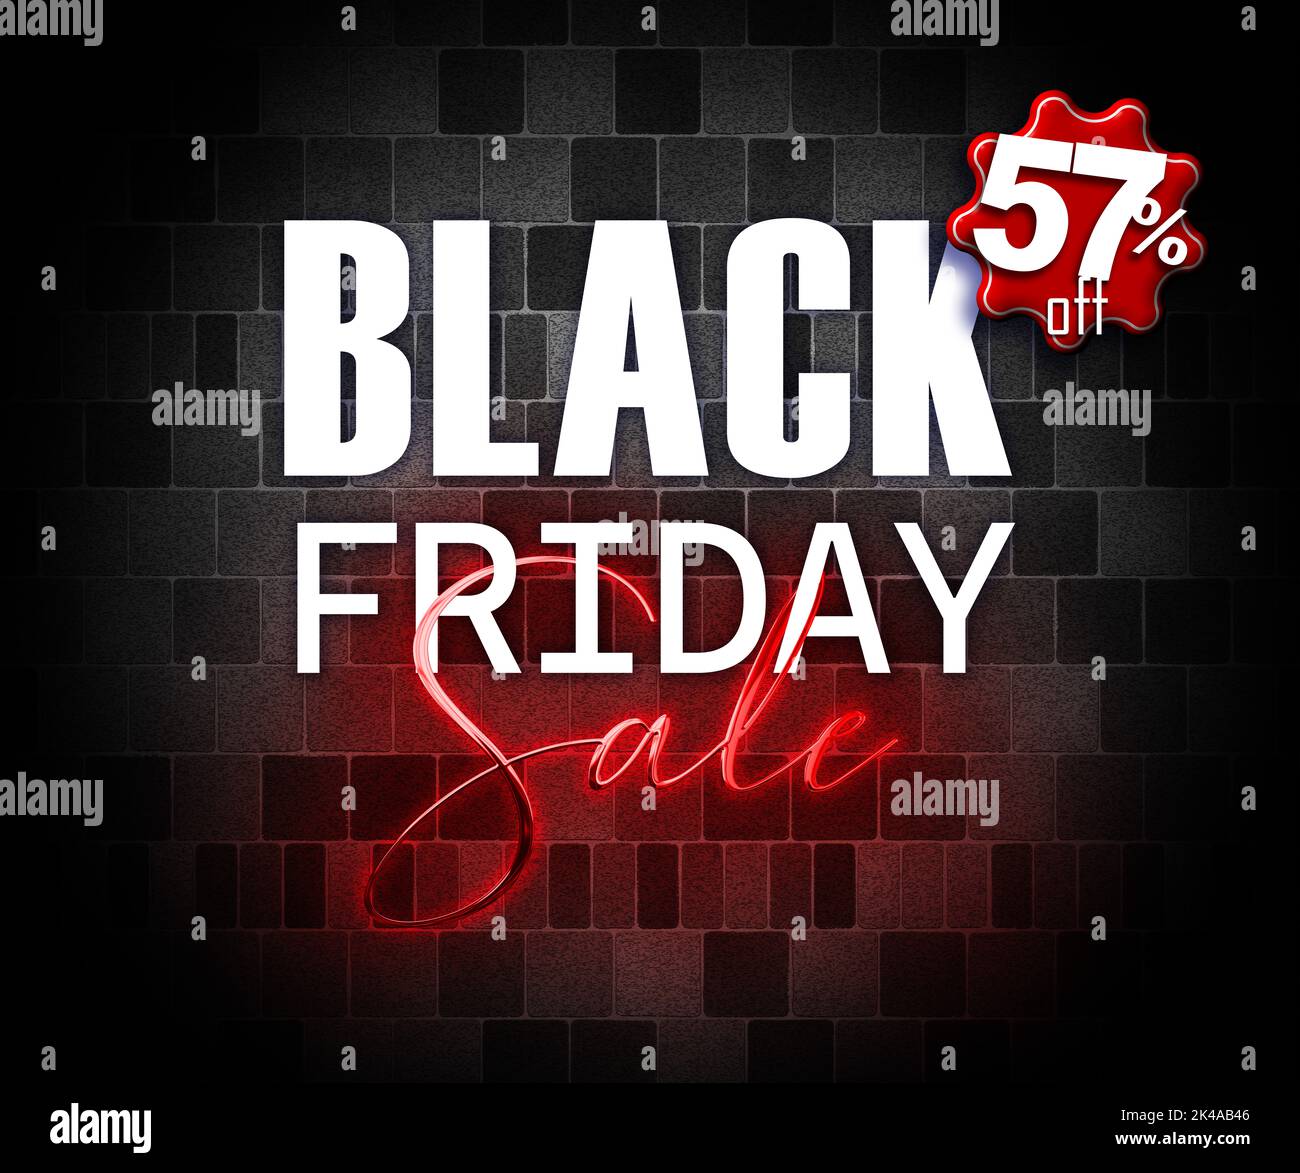 illustration with 3d elements black friday promotion banner 57 percent off sales increase Stock Photo